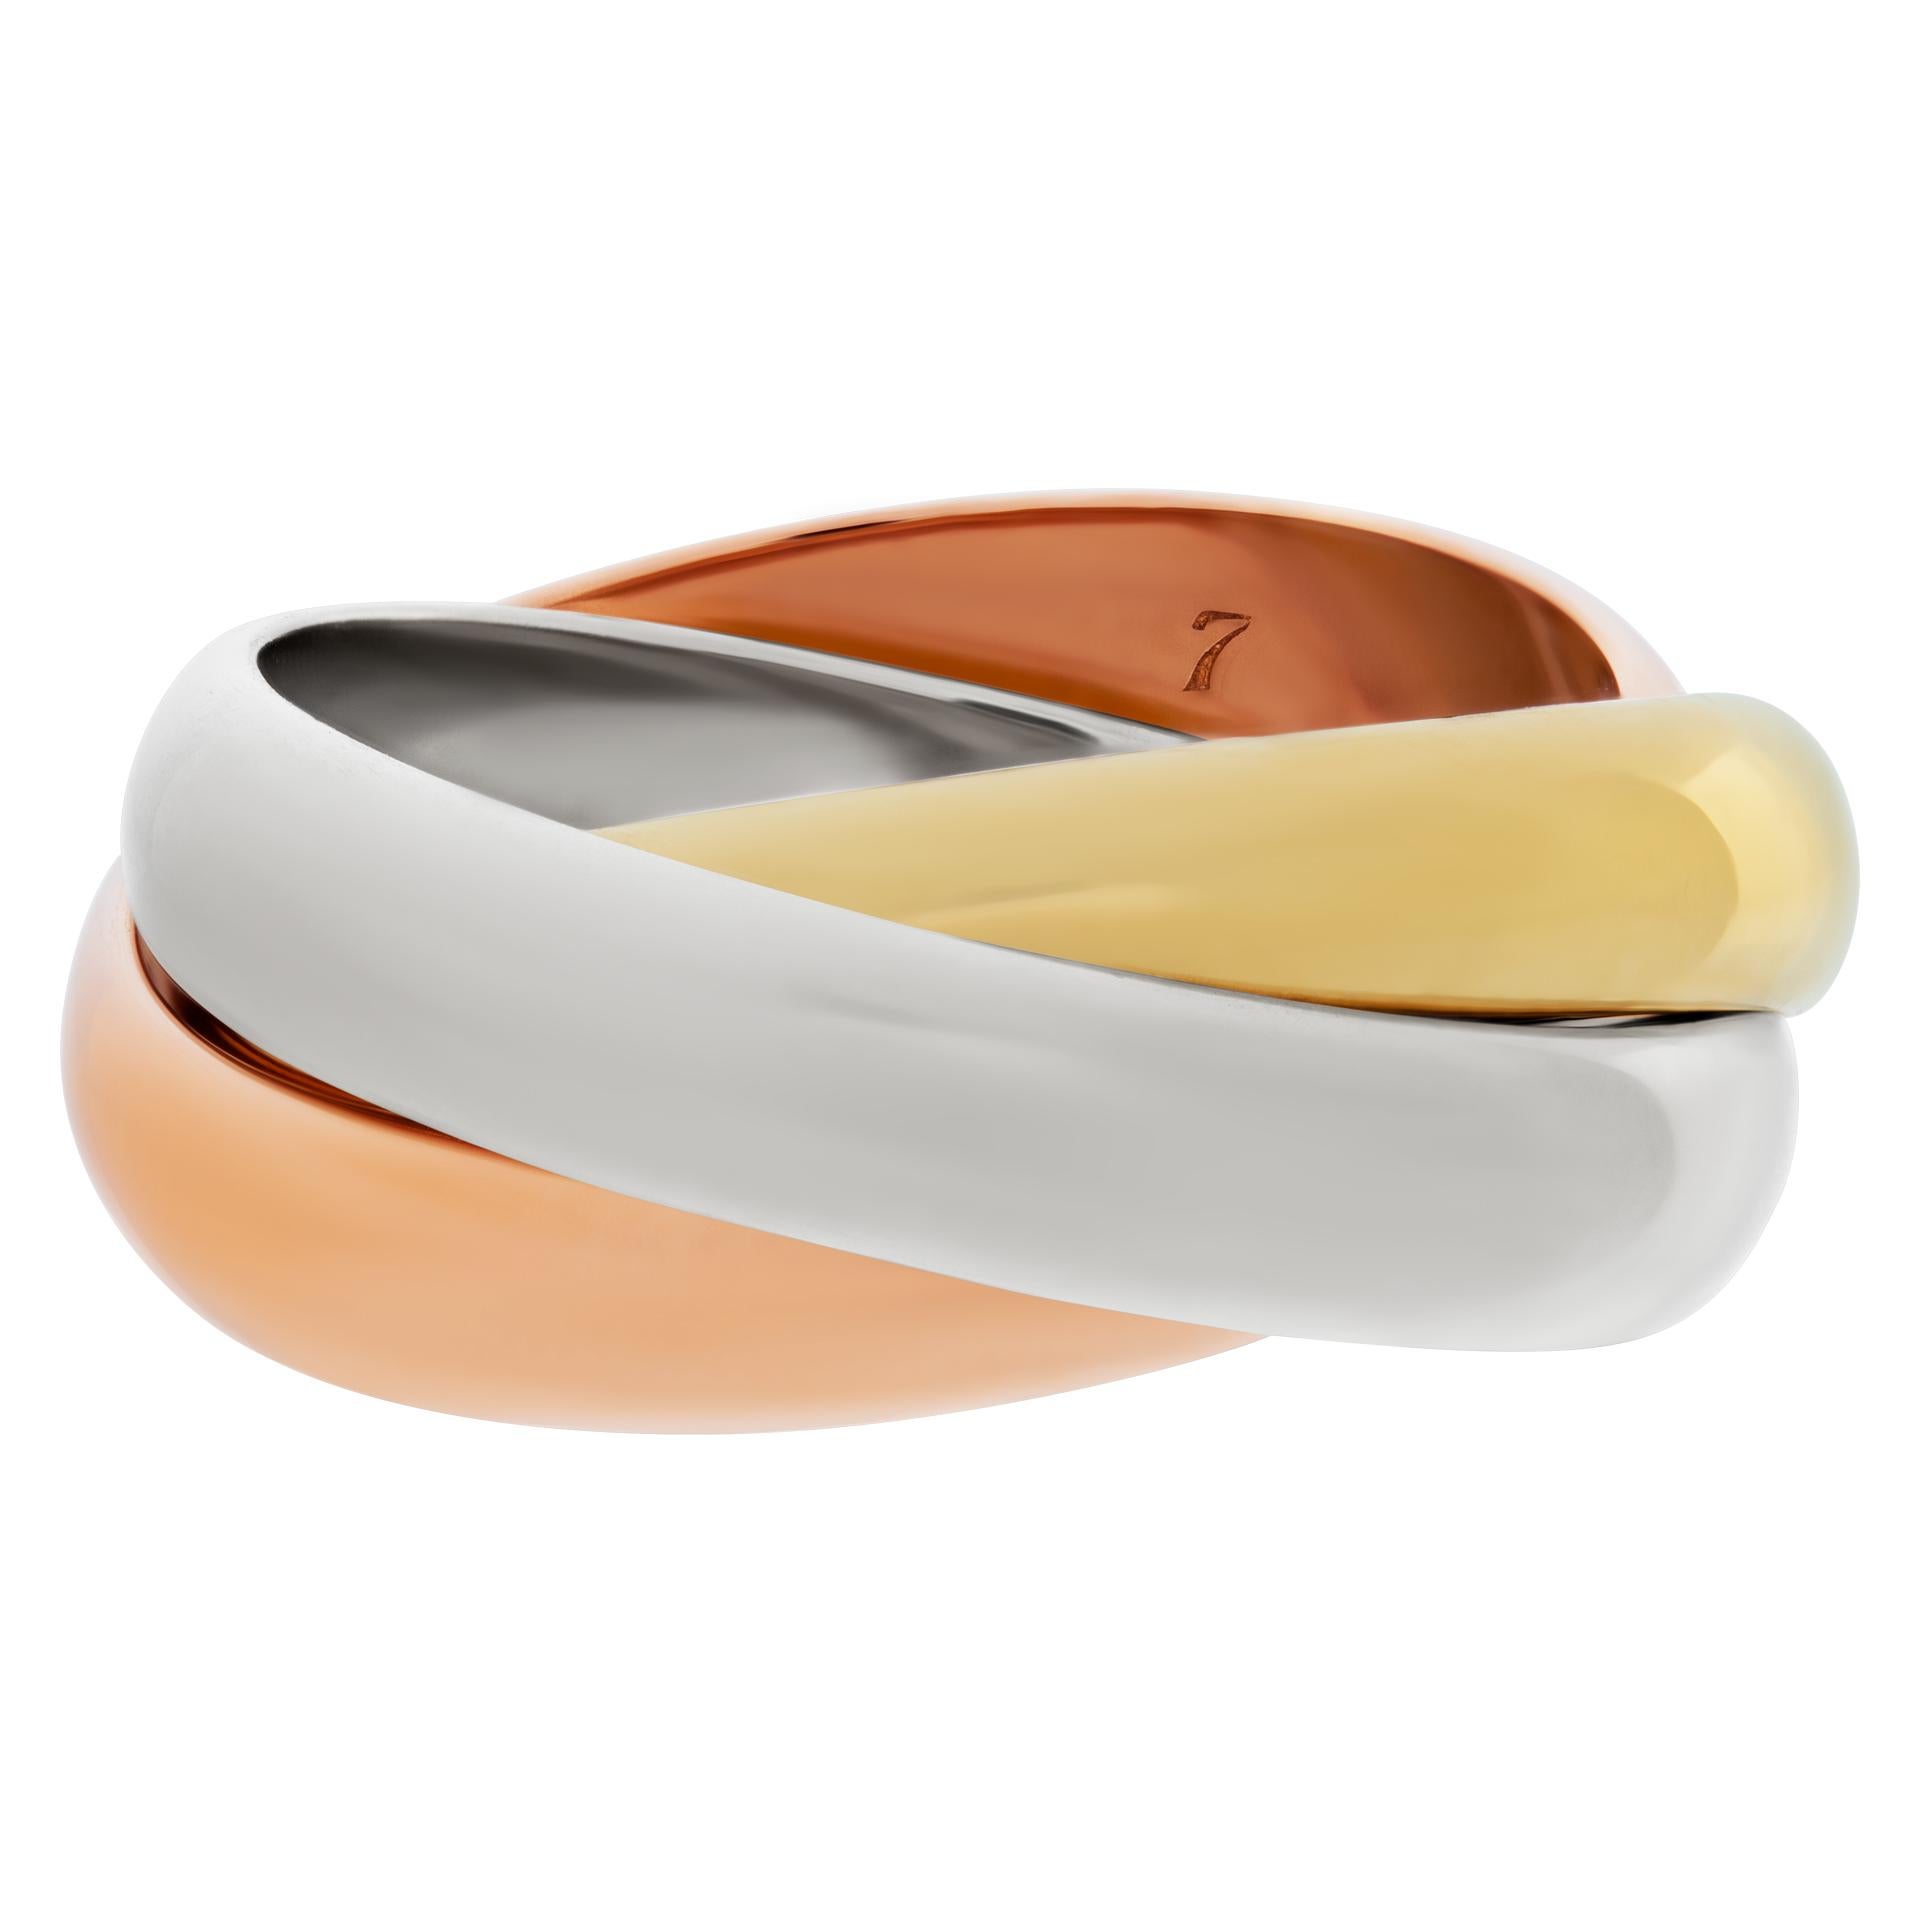 Tri-color rolling ring in 18k white, yellow and rose gold. Size 5.This ring is currently size 5 and some items can be sized up or down, please ask! It weighs 6.4 pennyweights and is 18k.
